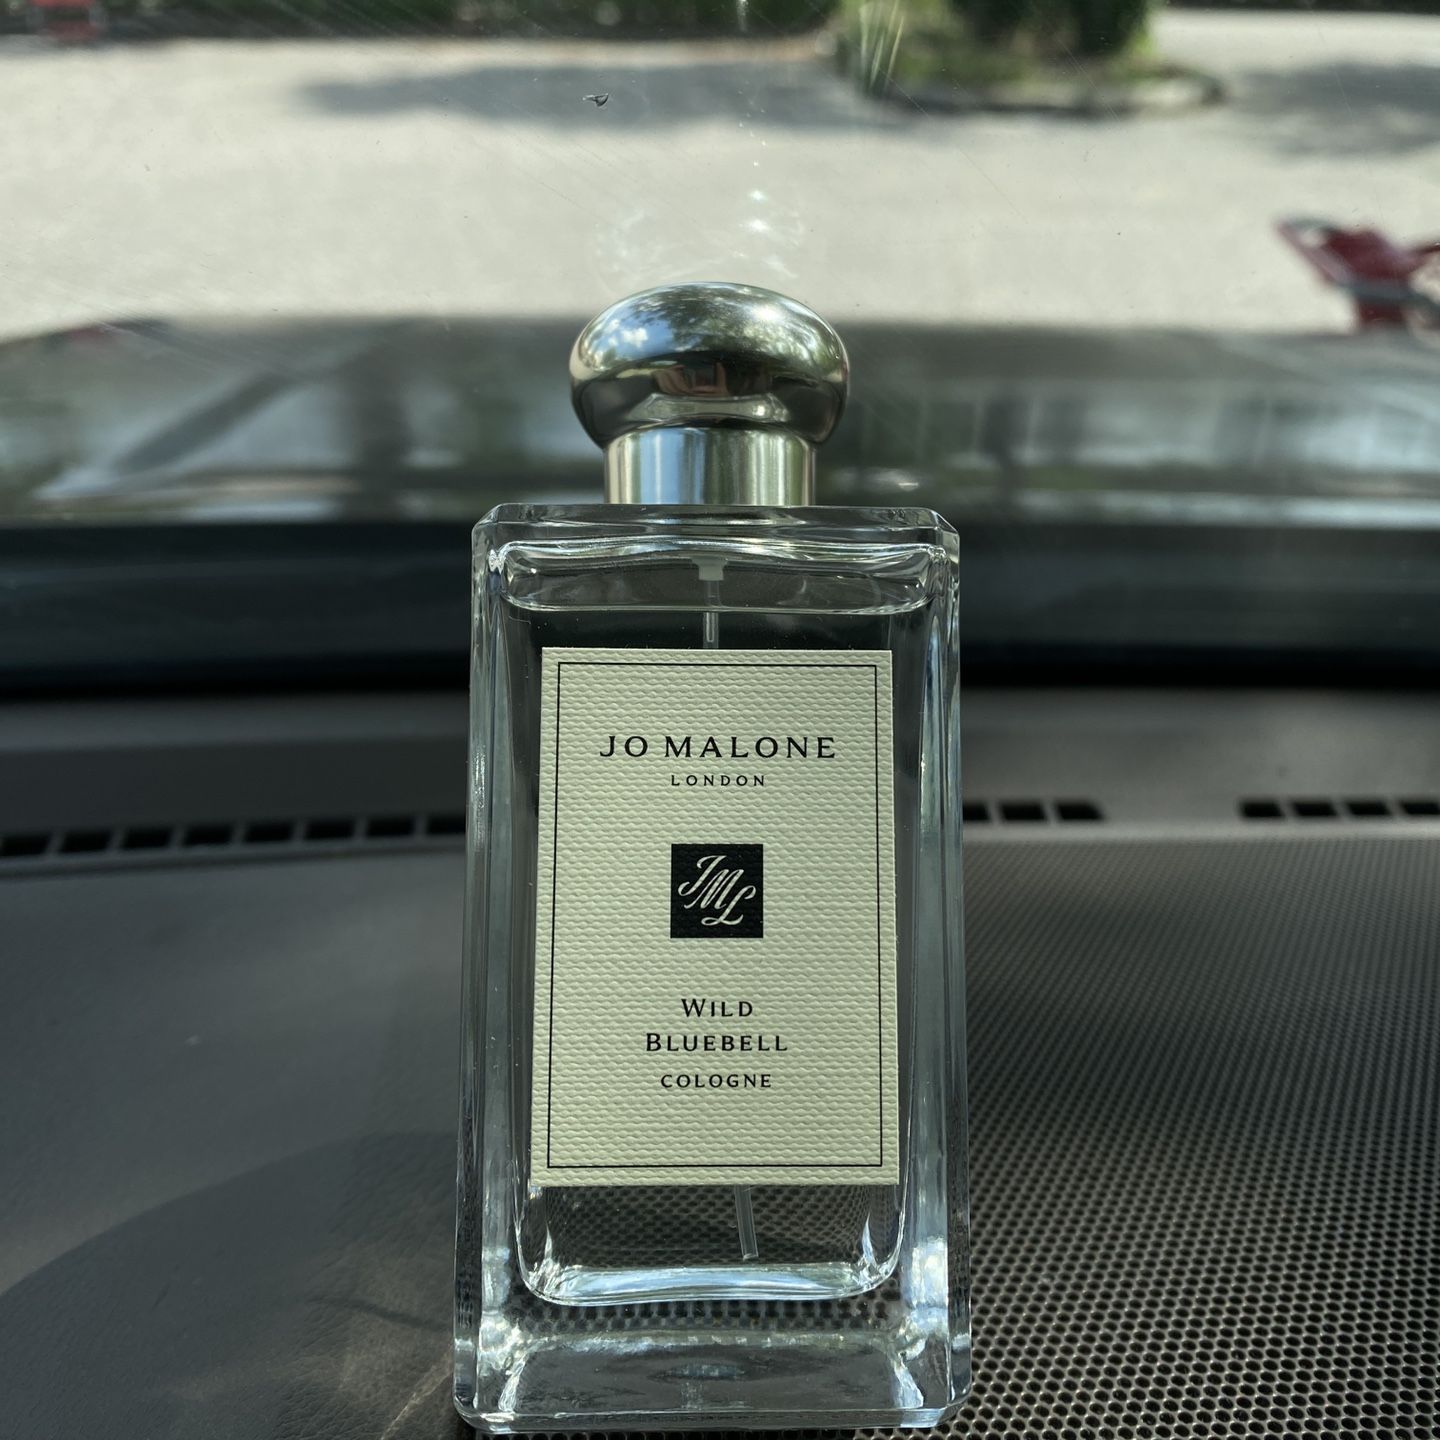 JO MALONE AUTHENTIC COLOGNES AND PERFUMES